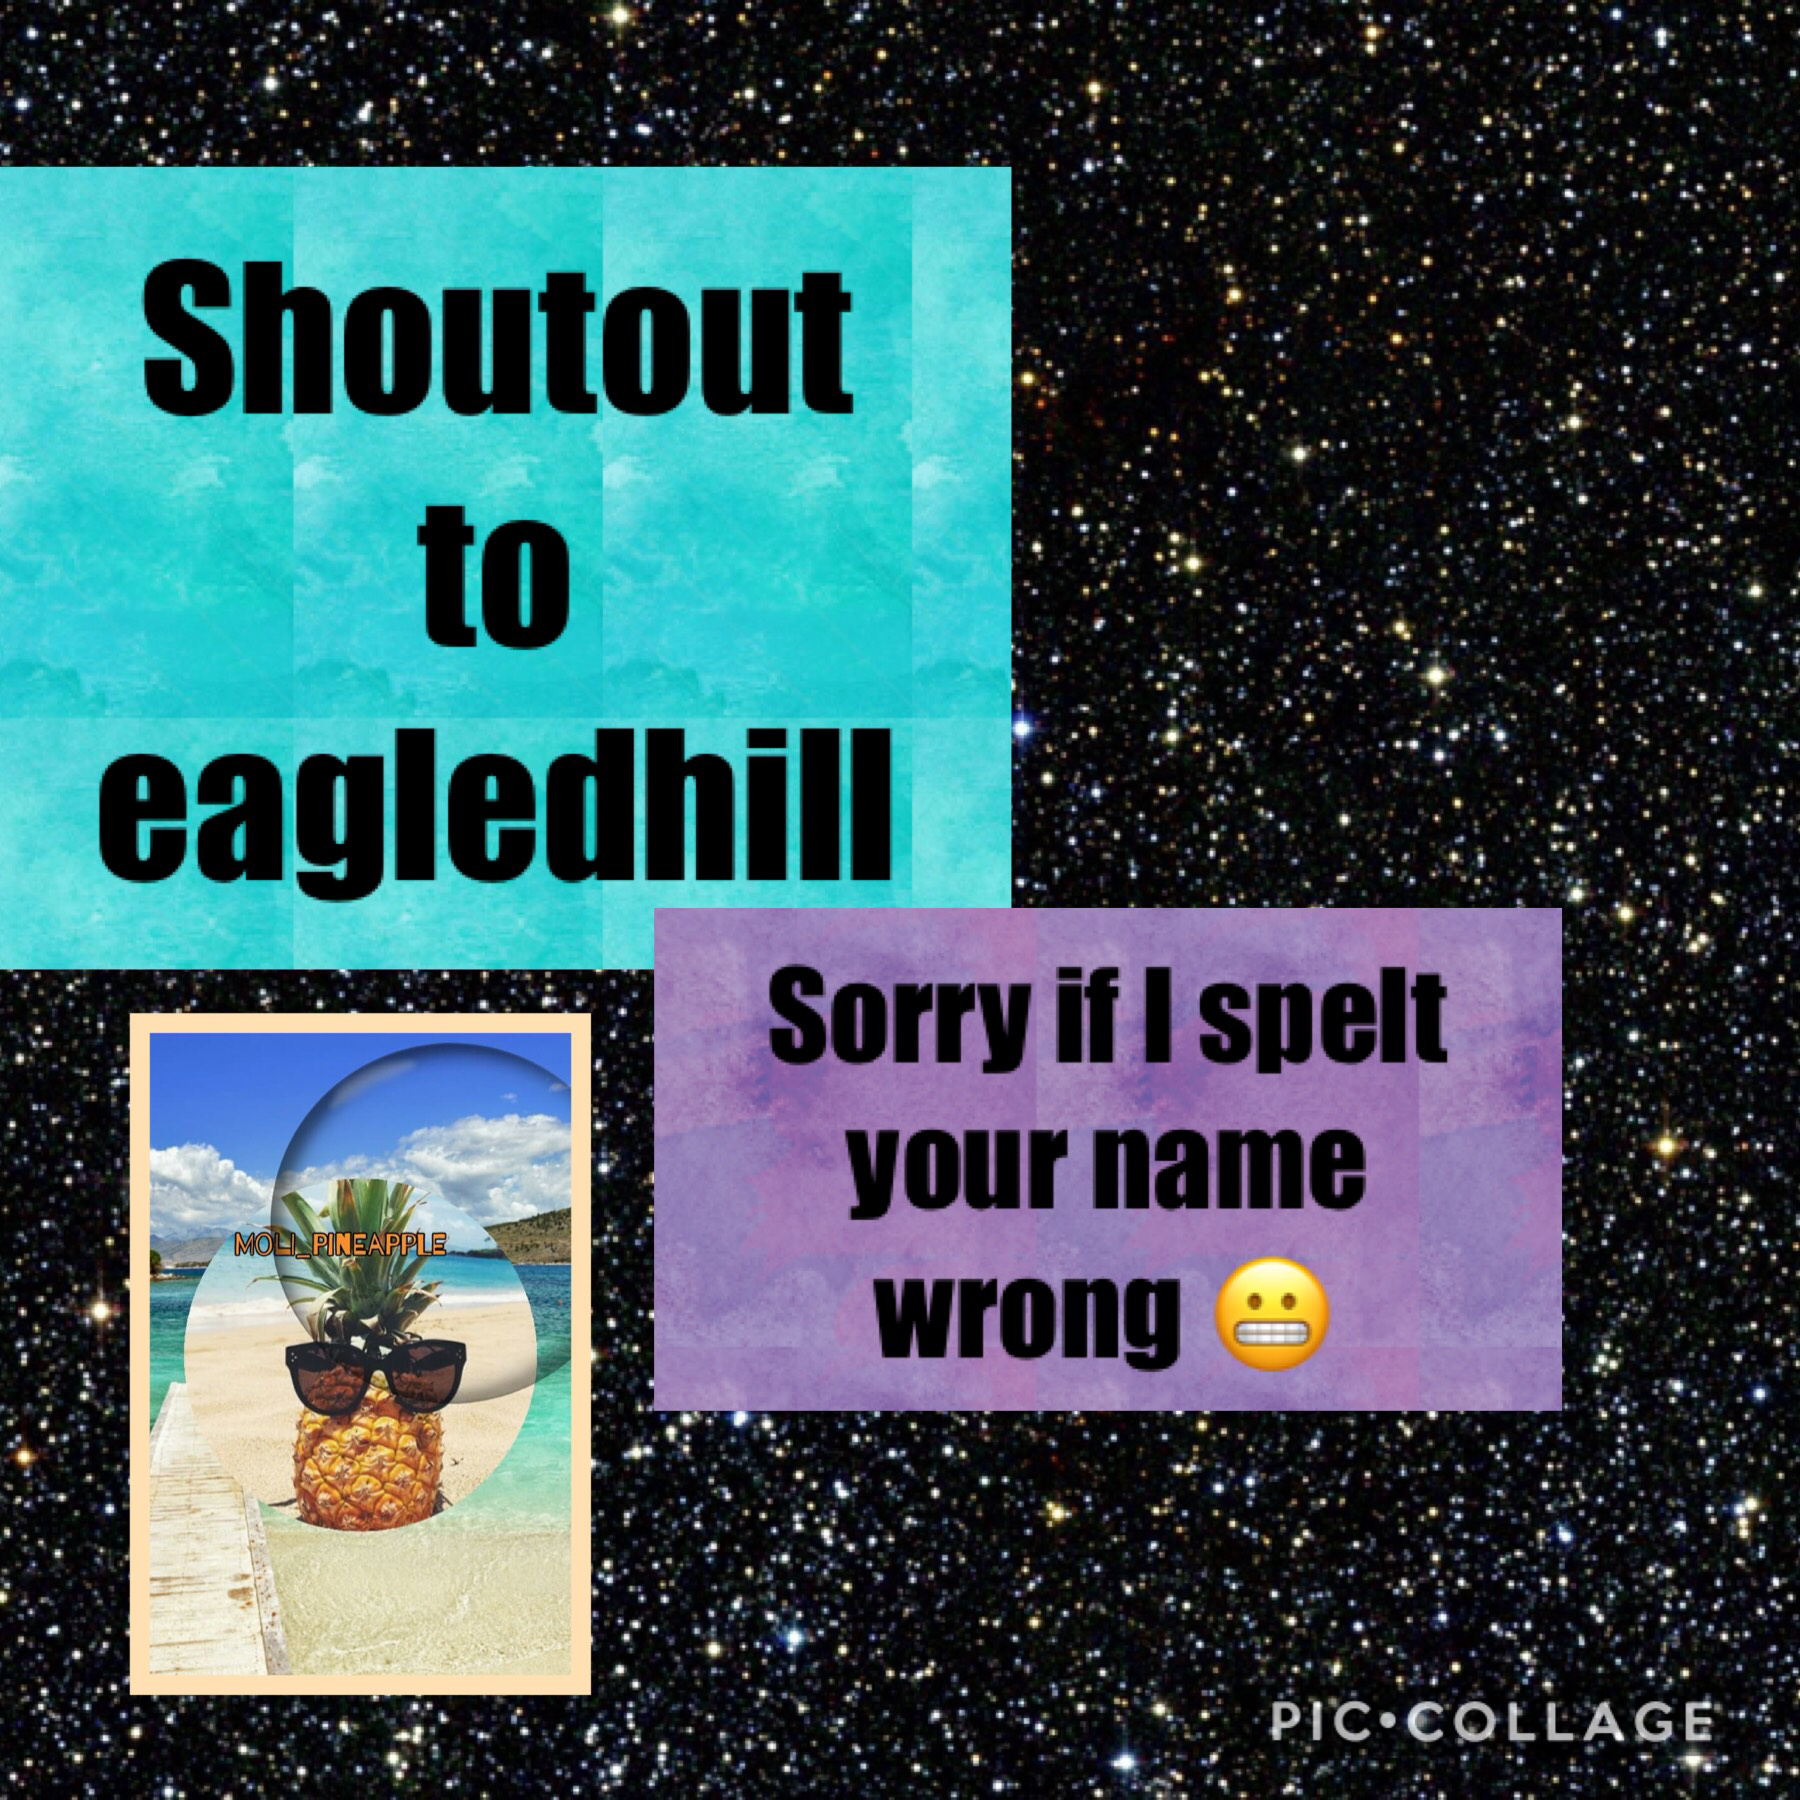 Shoutout to eagledhill for their amazing icon for my contest 